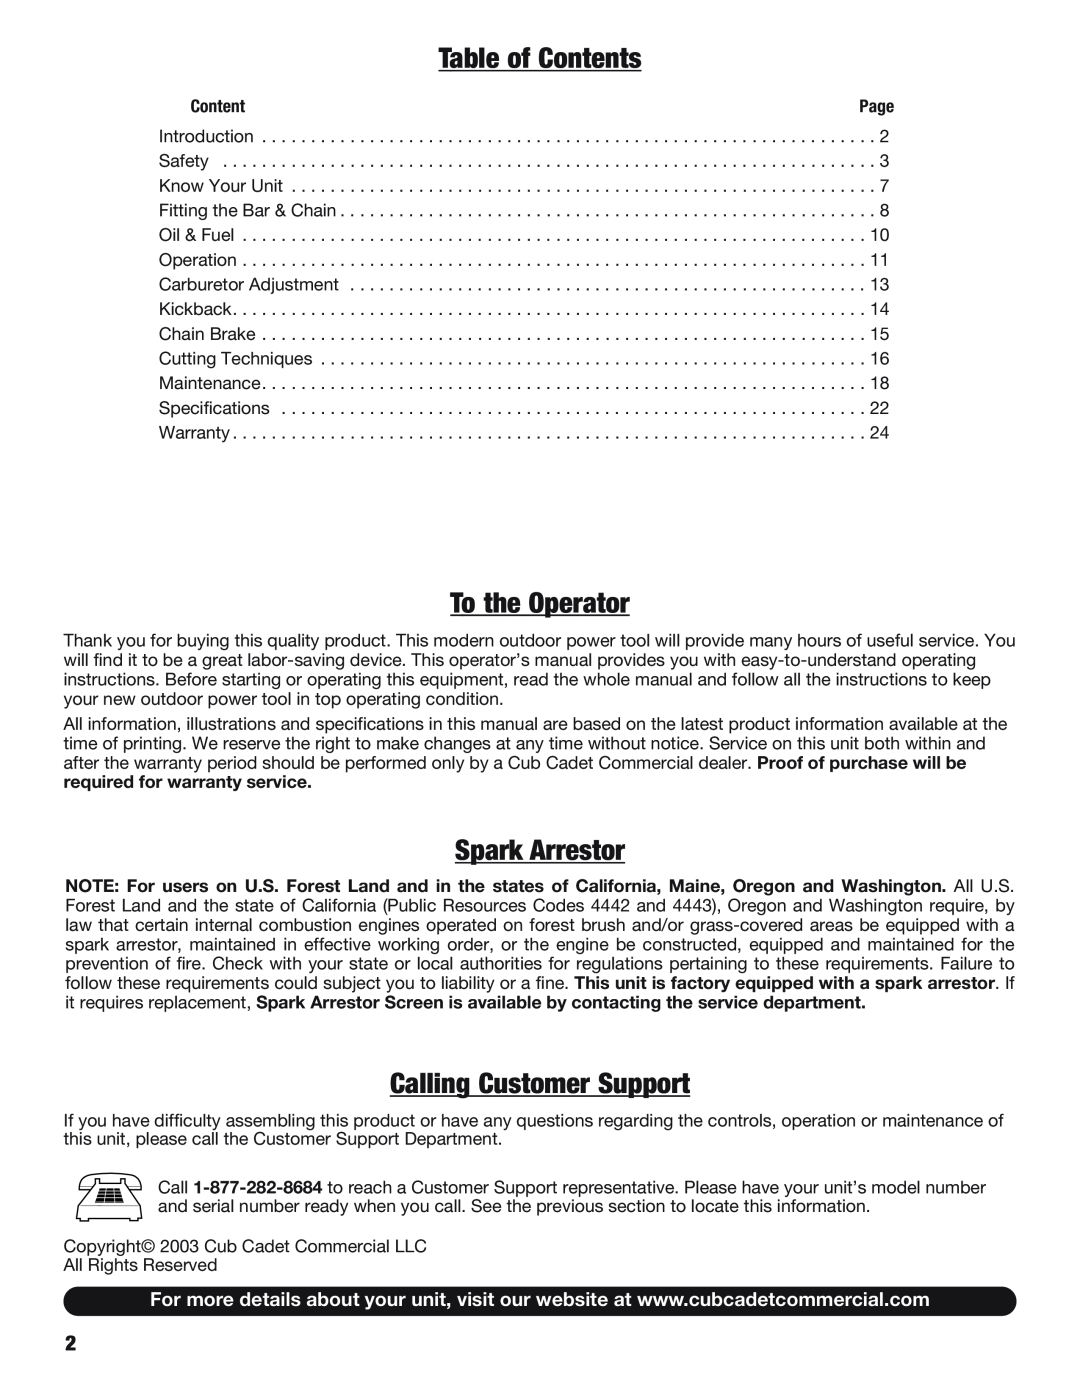 Cub Cadet CS5720 manual Table of Contents, To the Operator, Spark Arrestor, Calling Customer Support 